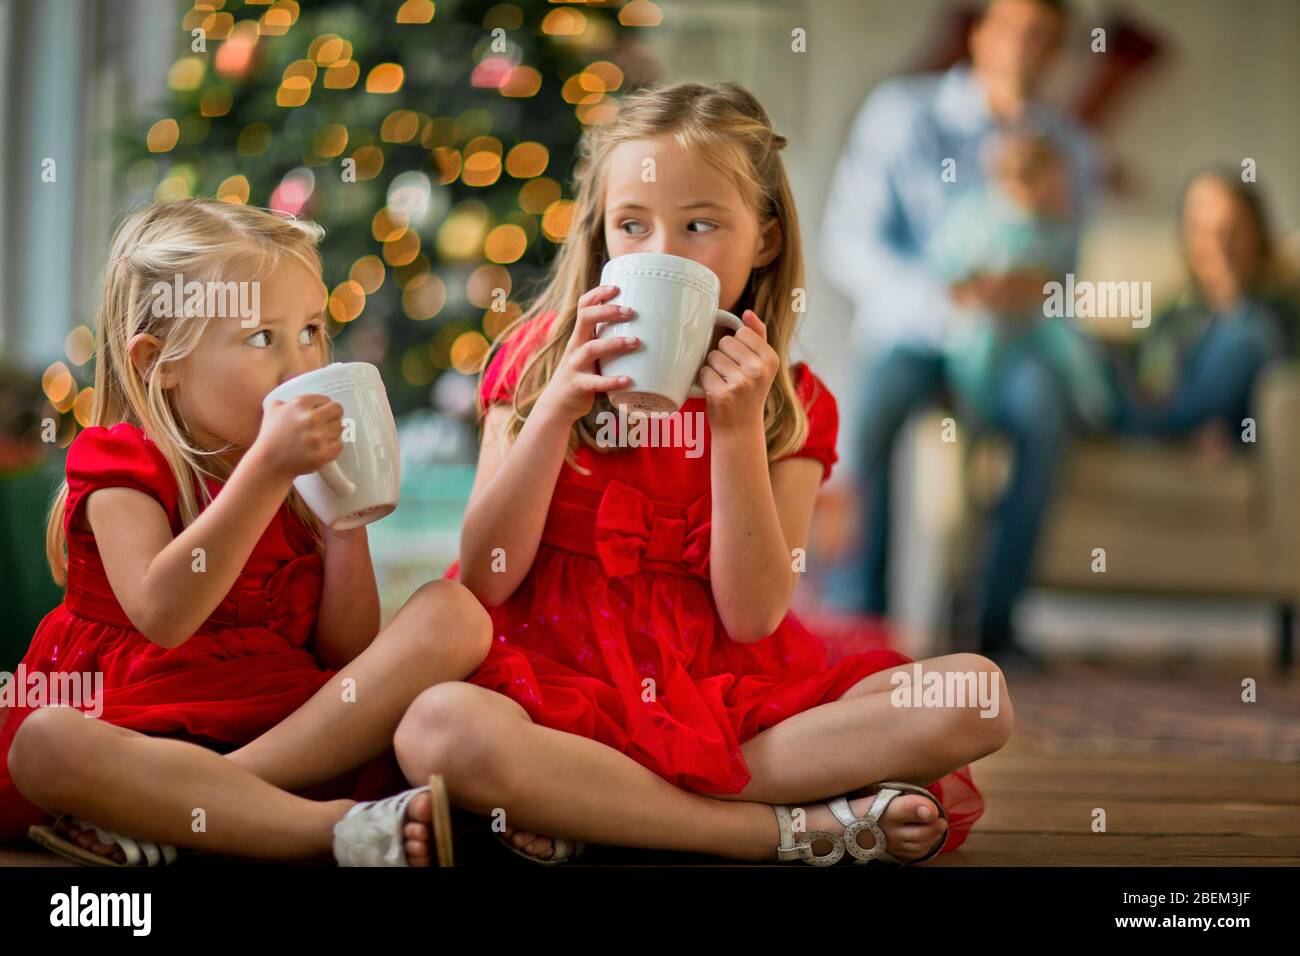 Two young girls drinking hot chocolate Stock Photo